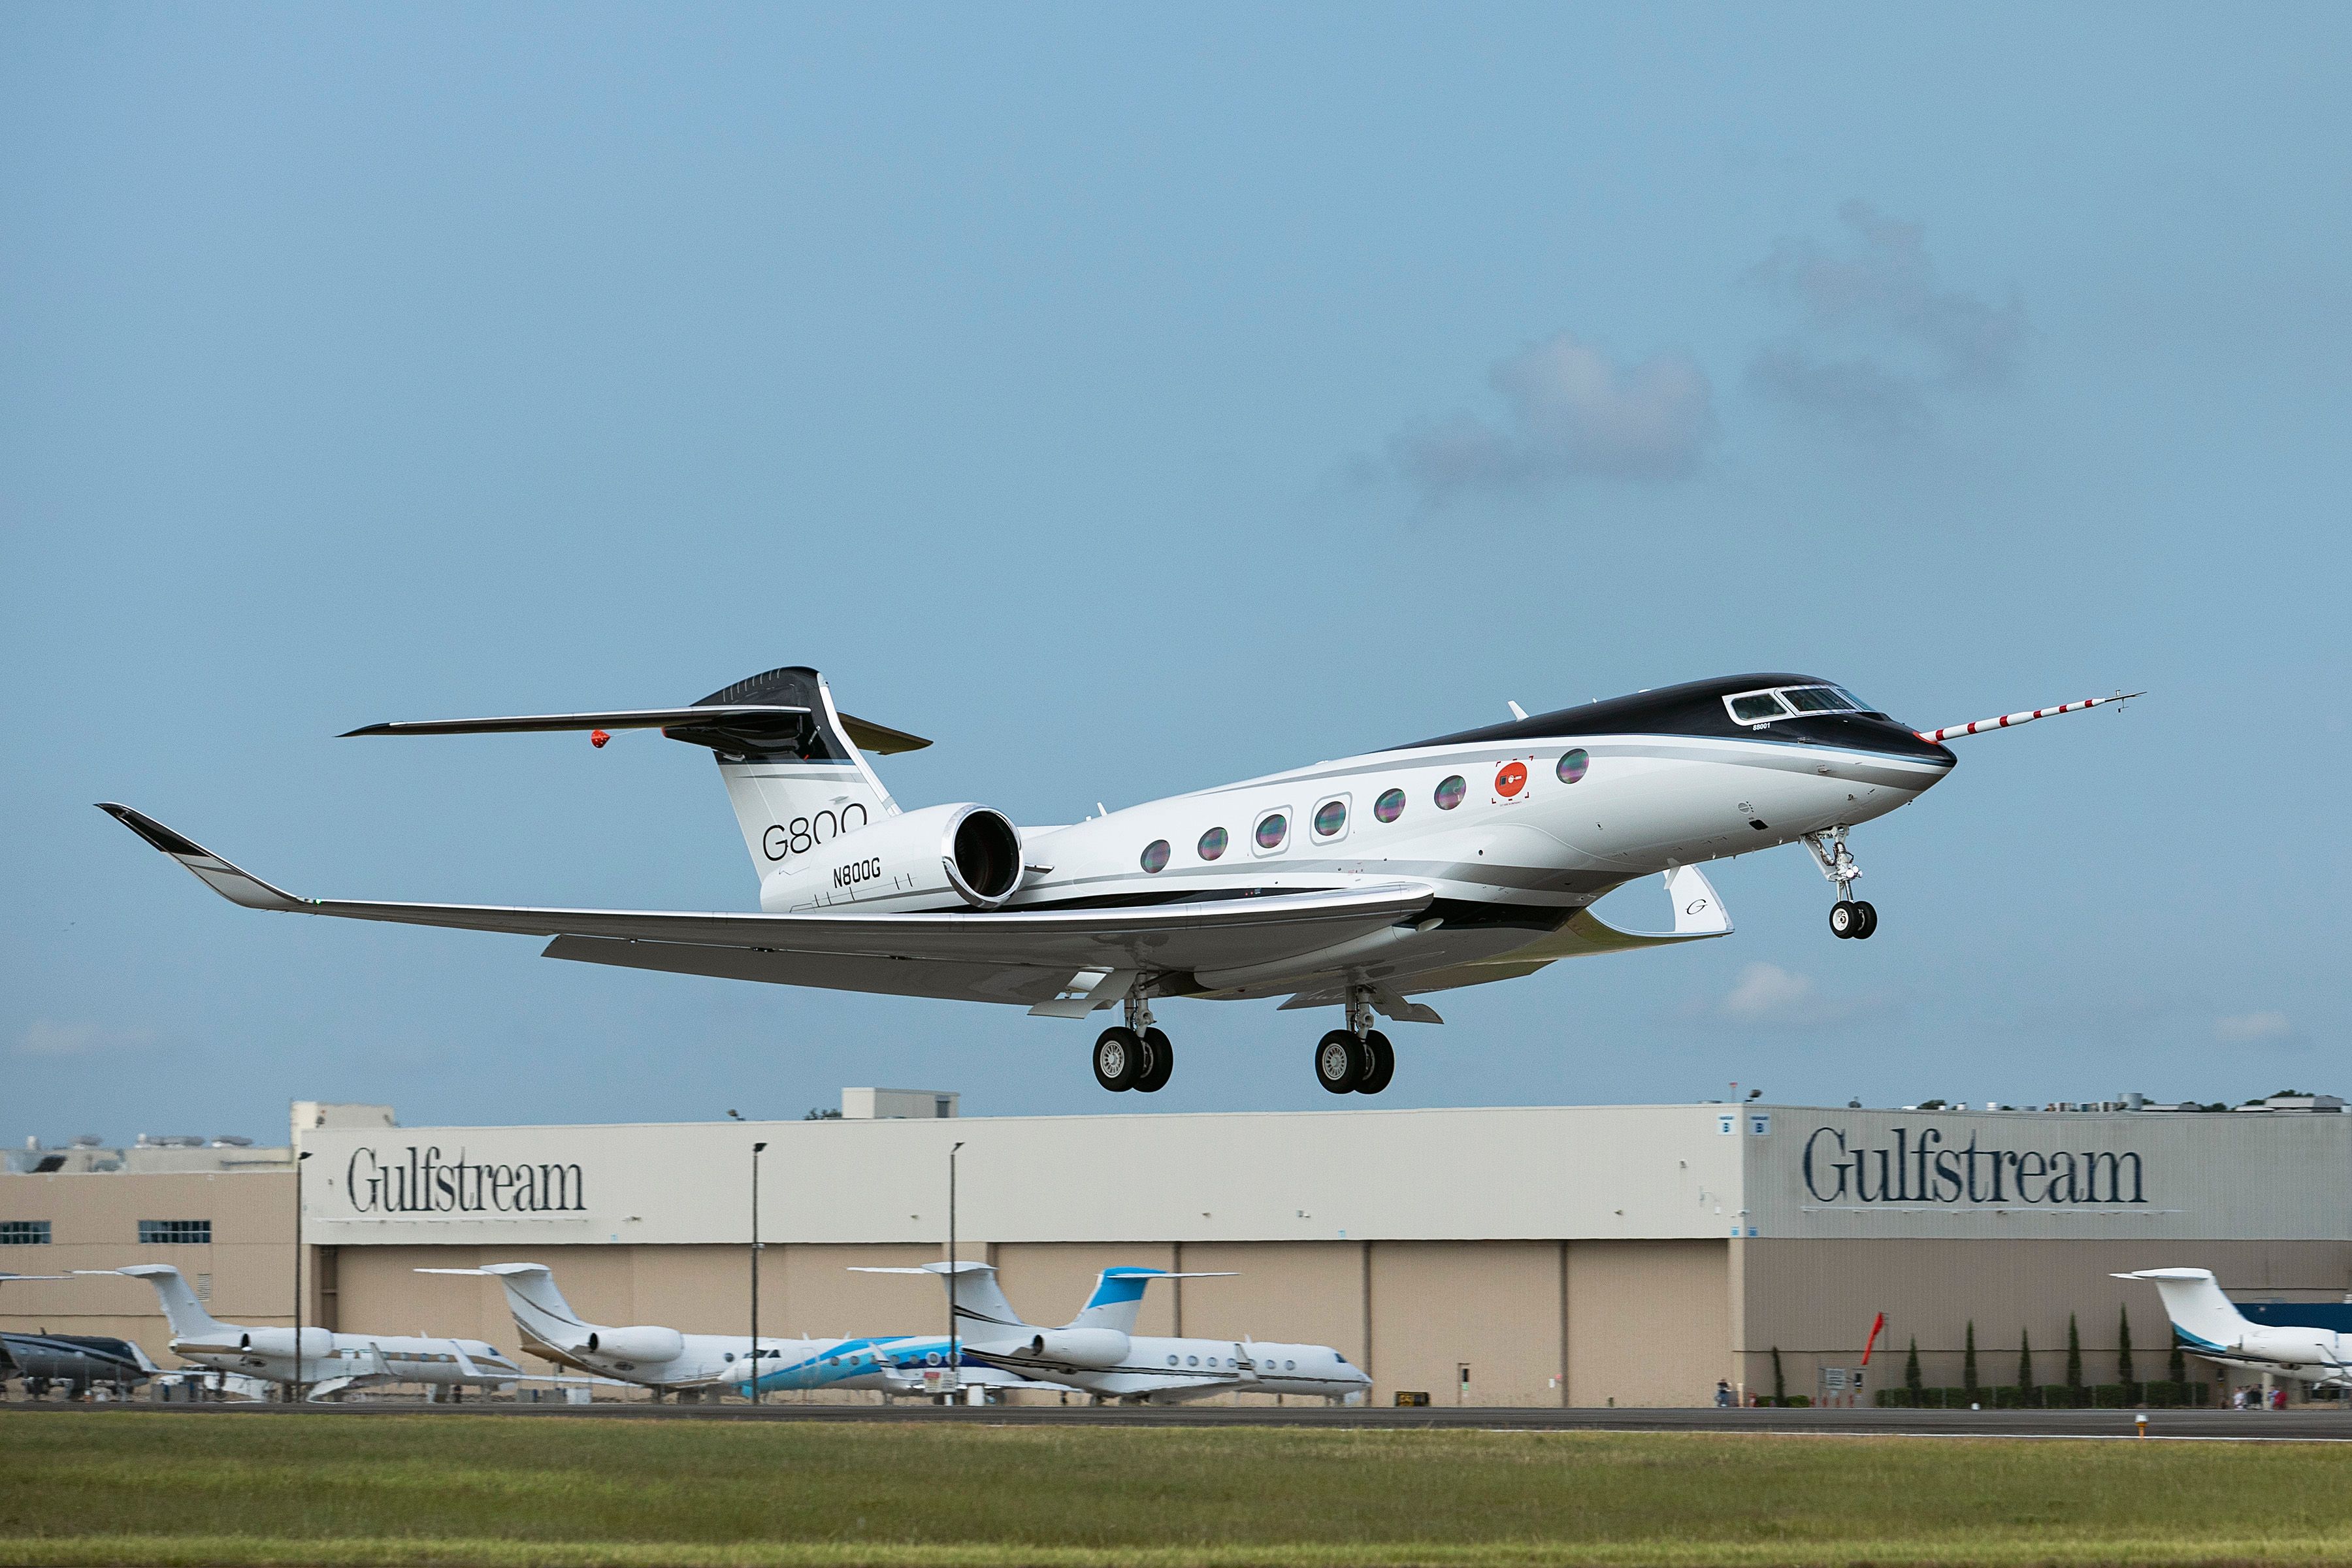 A Gulfstream G800 just after takeoff.